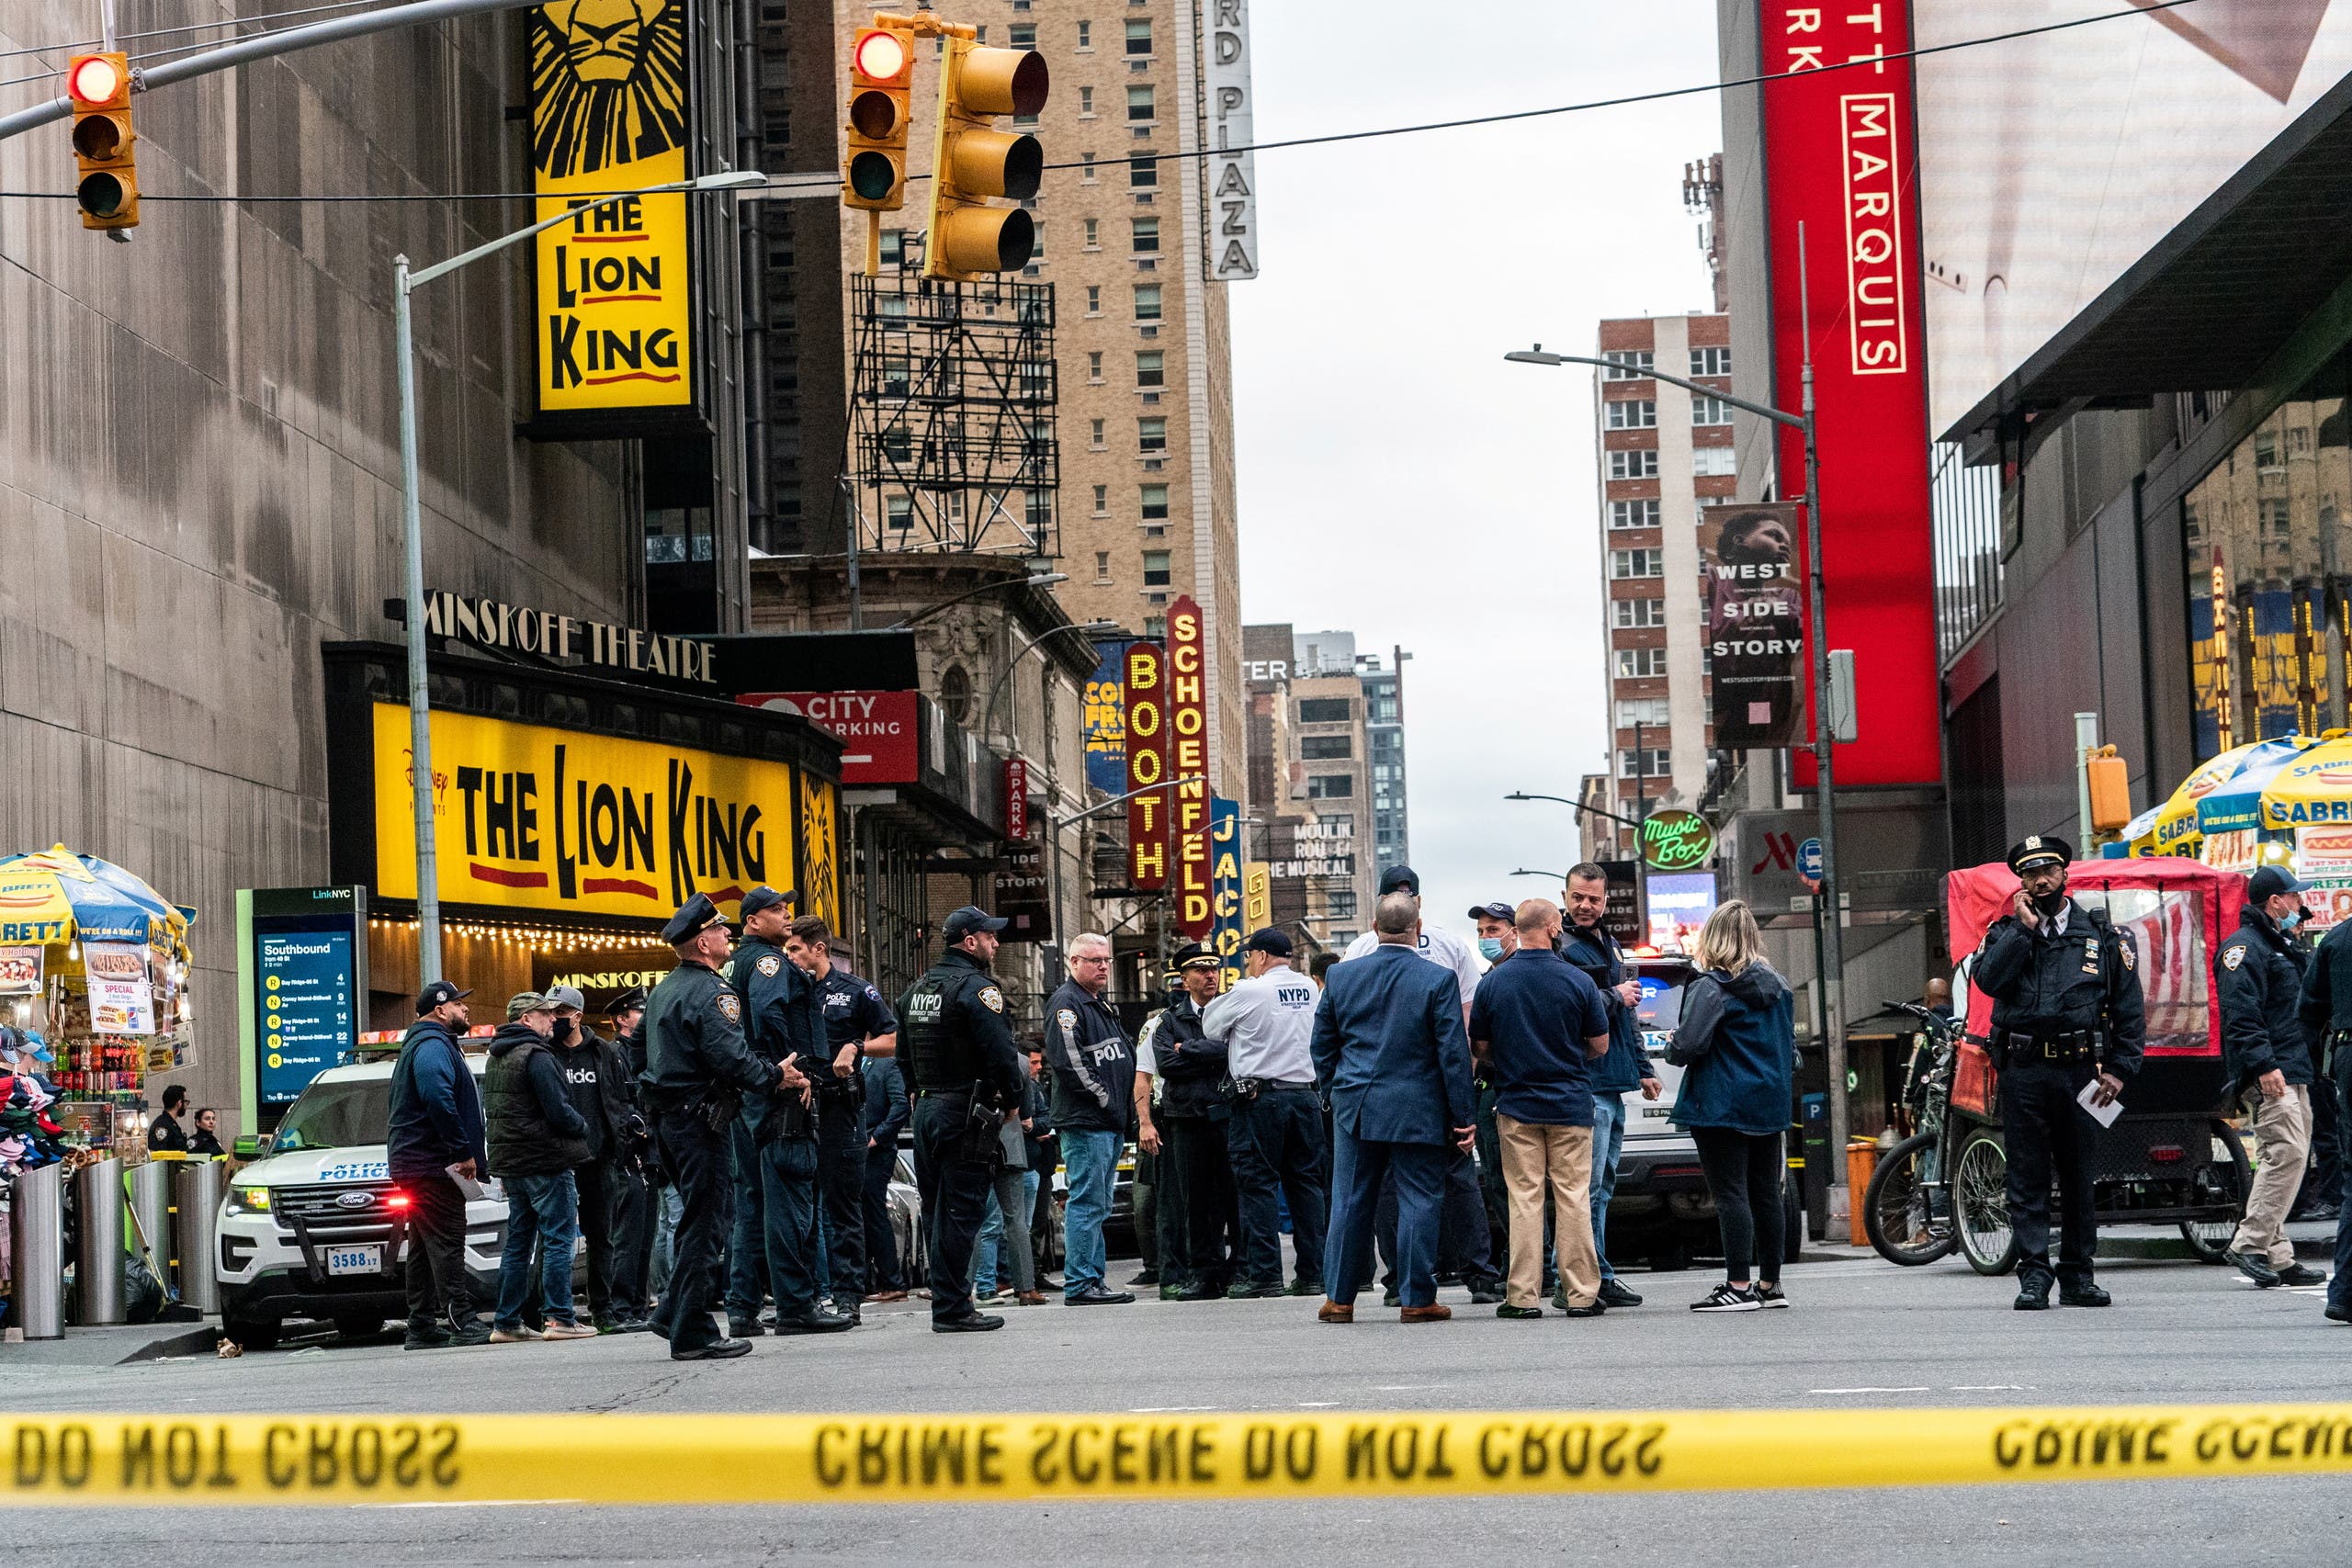 New York City police officers stand guard after a shooting incident in Times Square, New York, US, May 8, 2021. (Reuters)